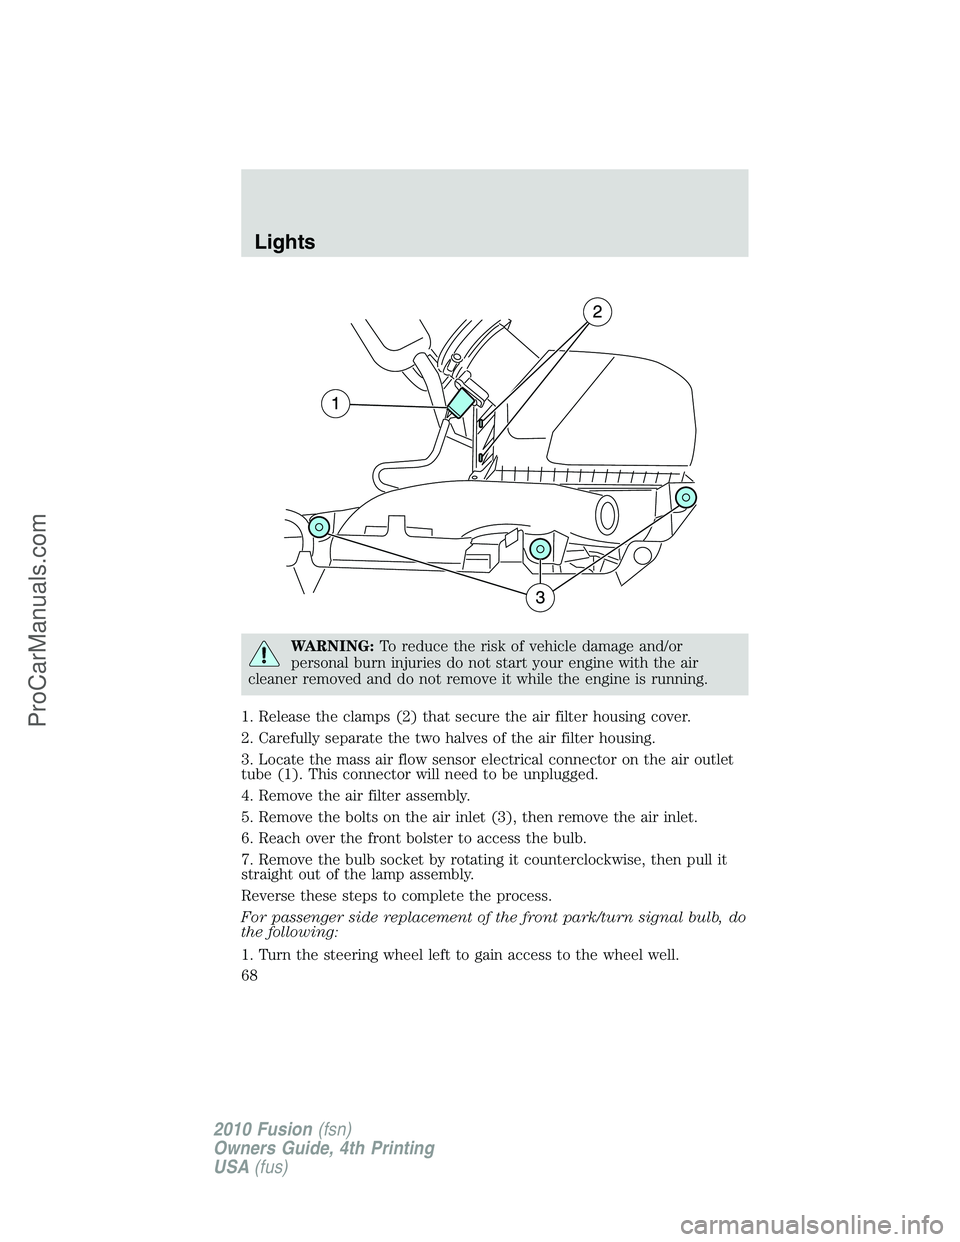 FORD FUSION 2010  Owners Manual WARNING:To reduce the risk of vehicle damage and/or
personal burn injuries do not start your engine with the air
cleaner removed and do not remove it while the engine is running.
1. Release the clamps